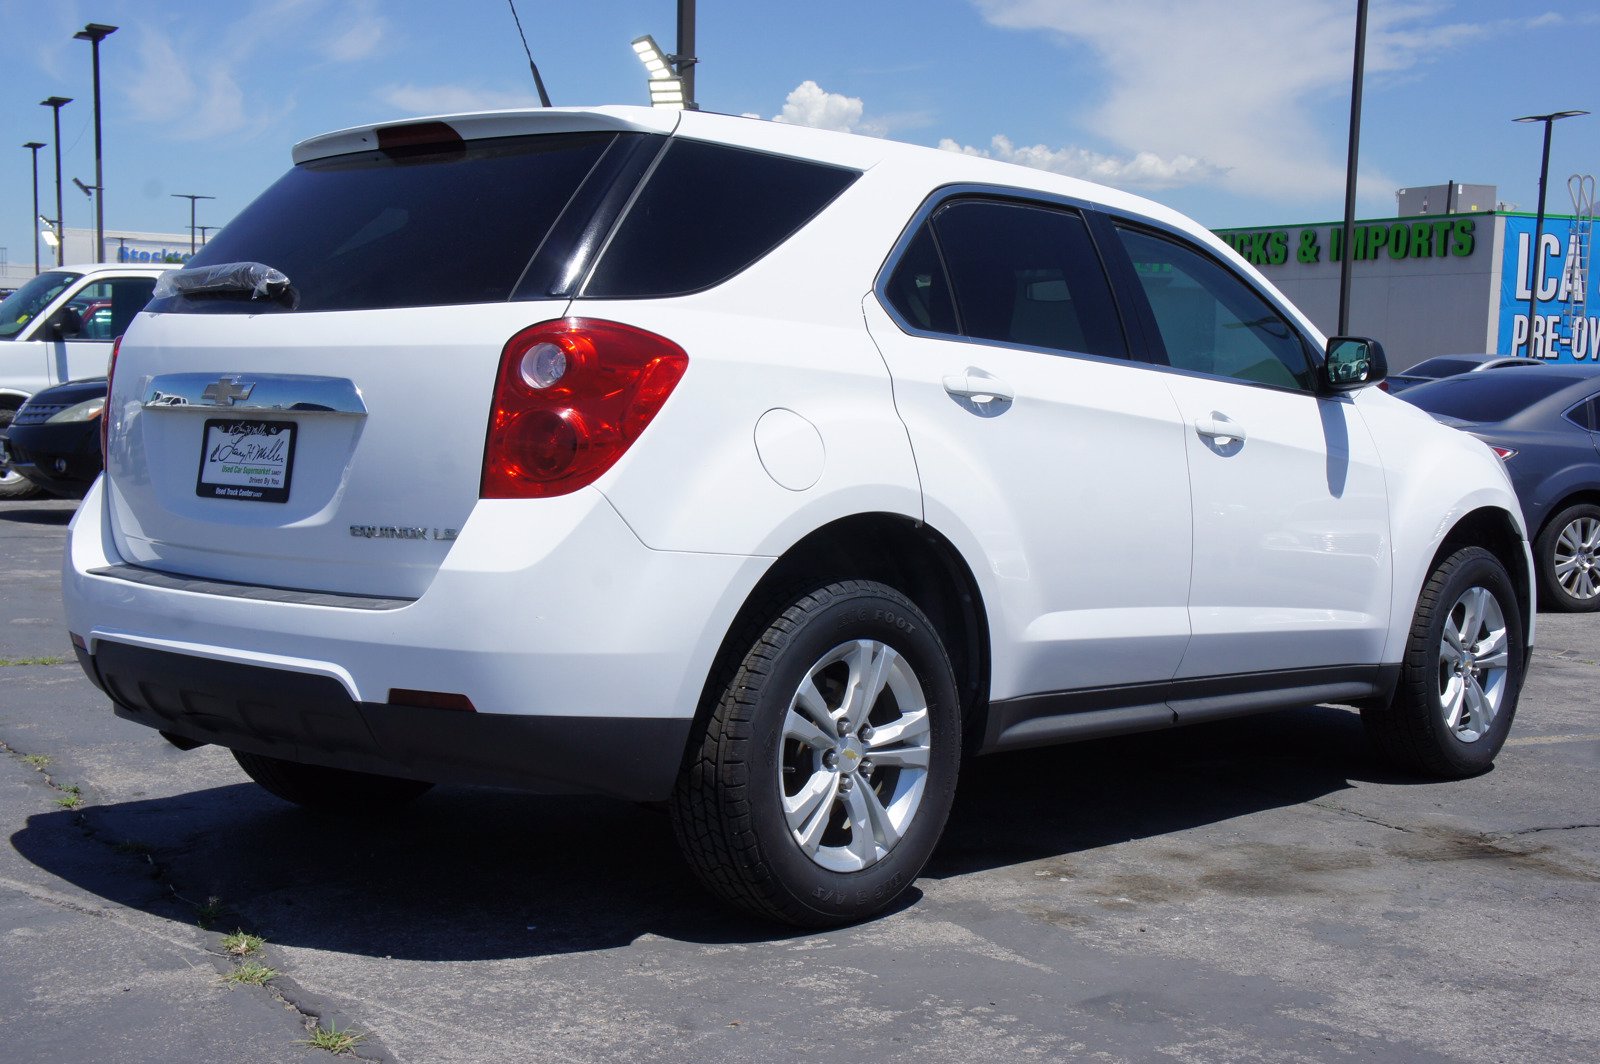 Pre-Owned 2010 Chevrolet Equinox LS Sport Utility in Sandy #B5436A 2CNALBEW6A6370846 | Larry H